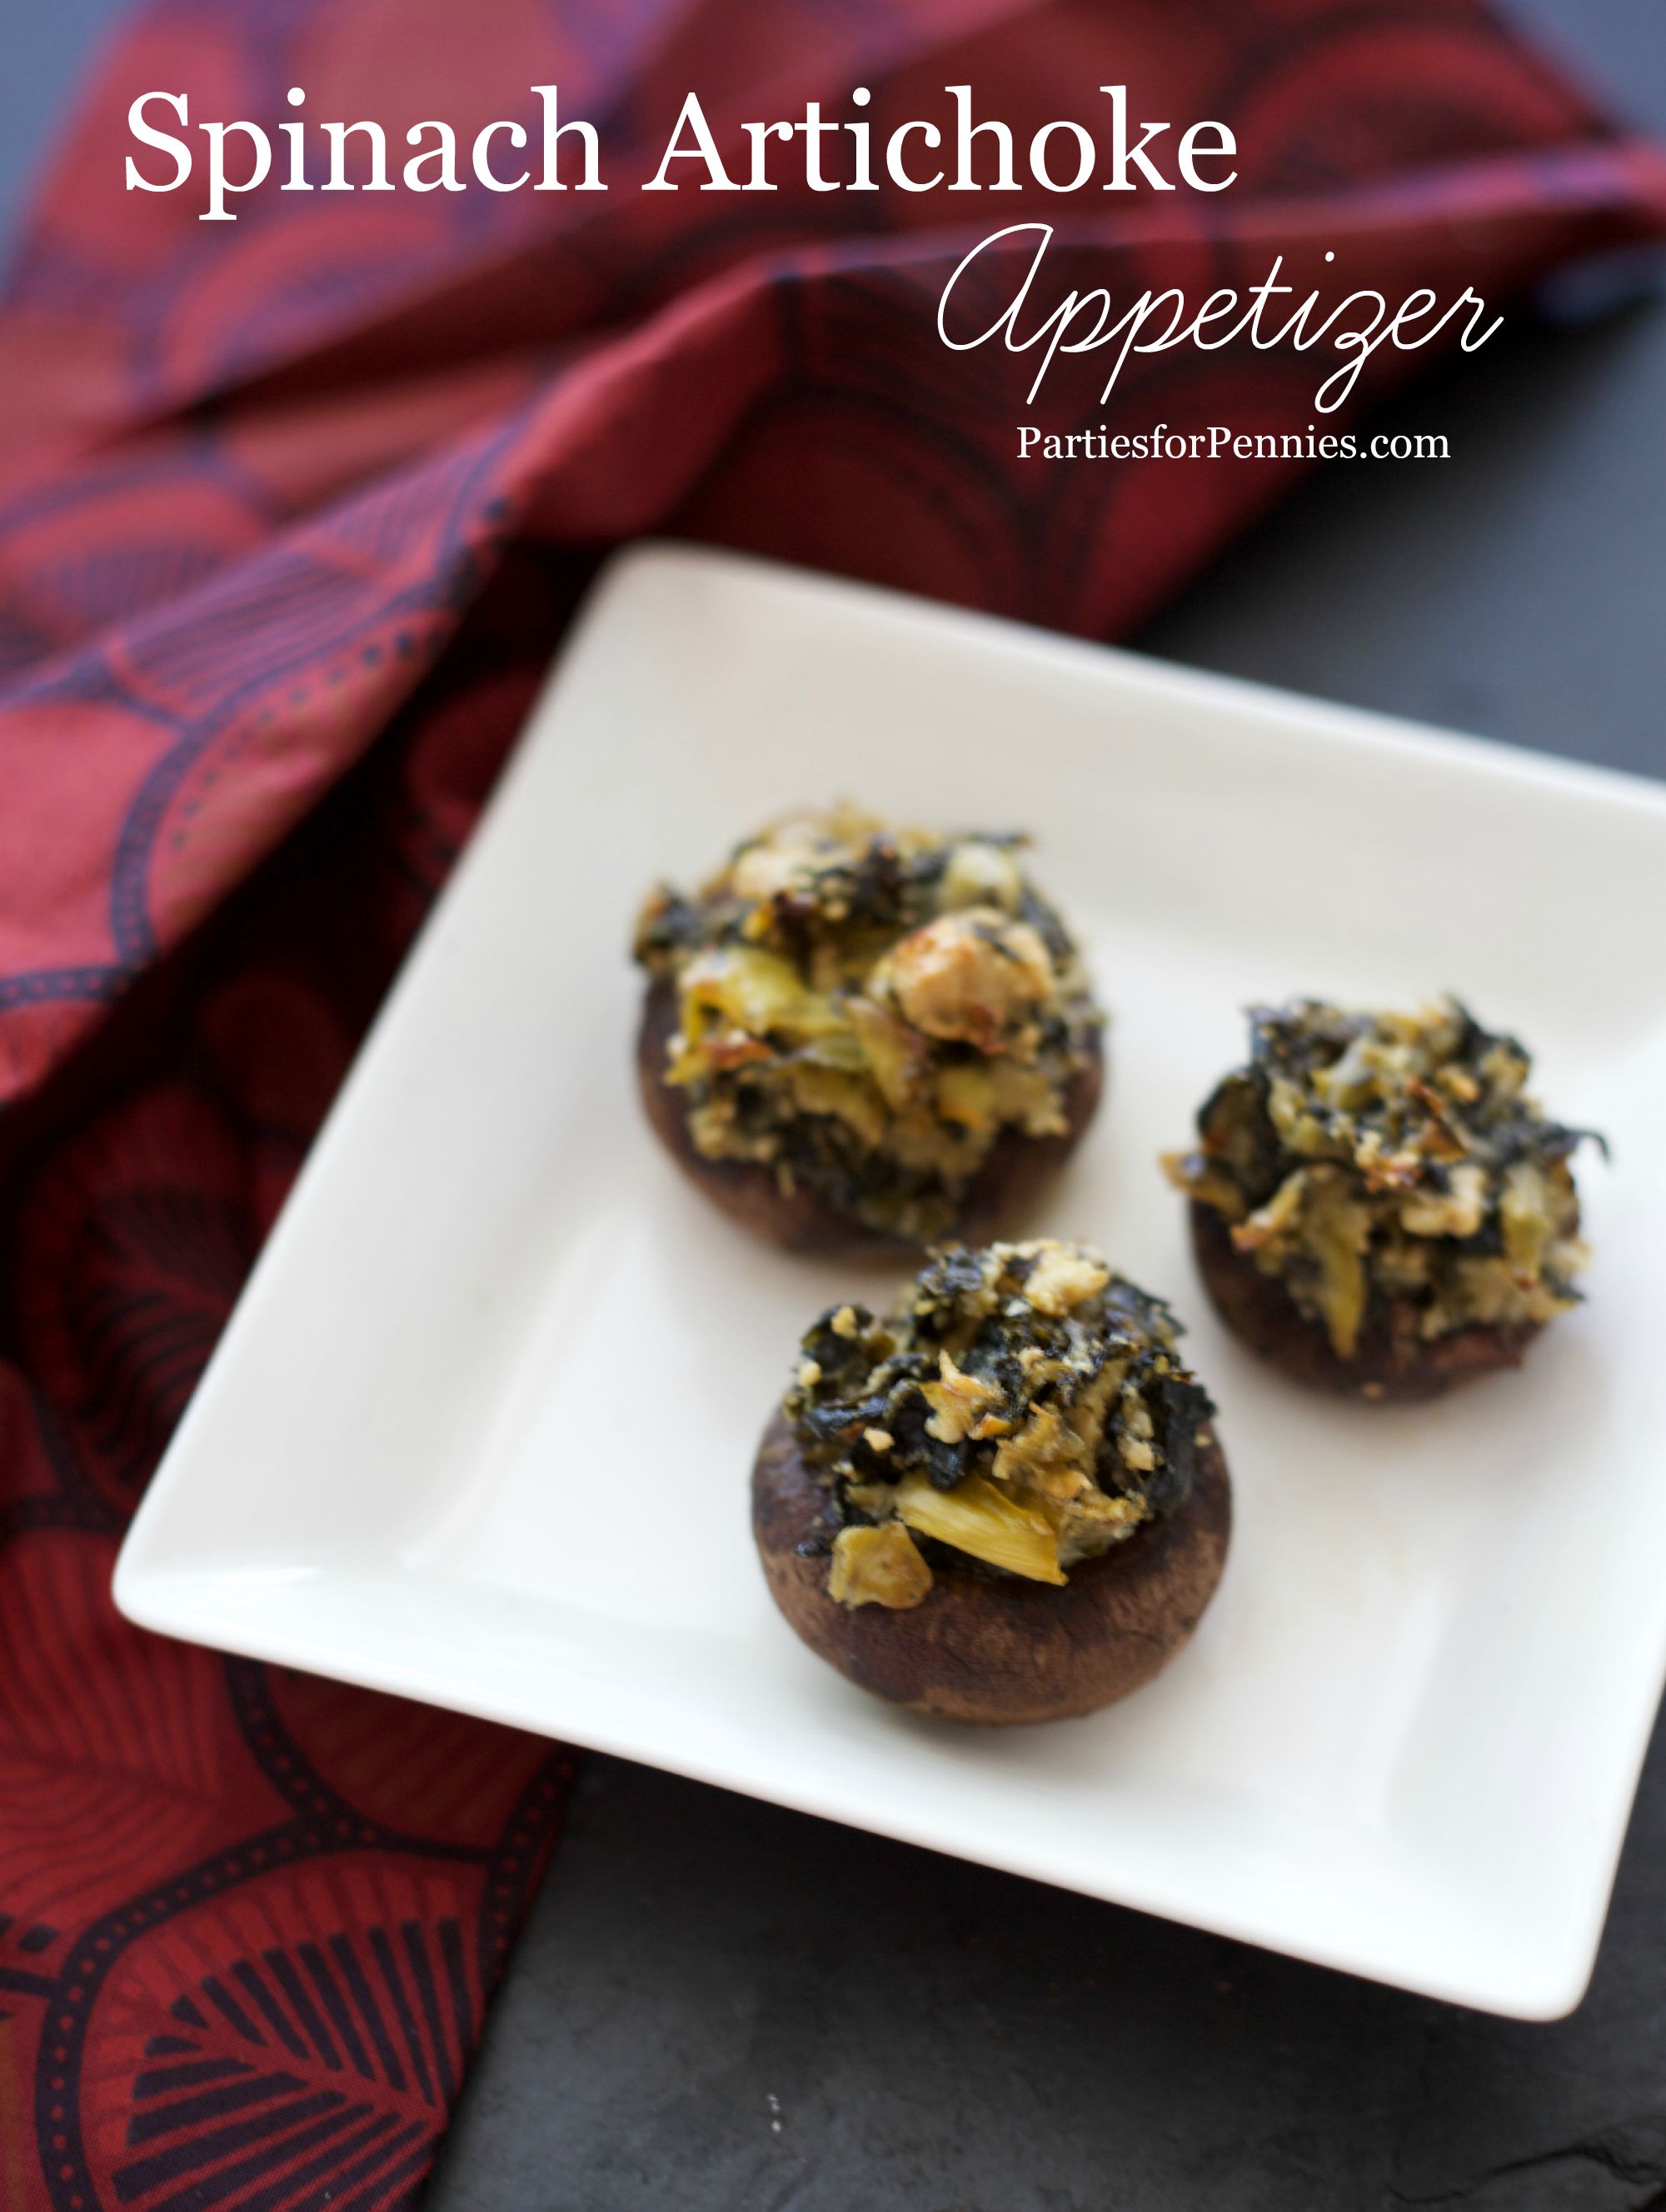  Spinach Artichoke Appetizer by PartiesforPennies.com | 20 Budget-Friendly Appetizers